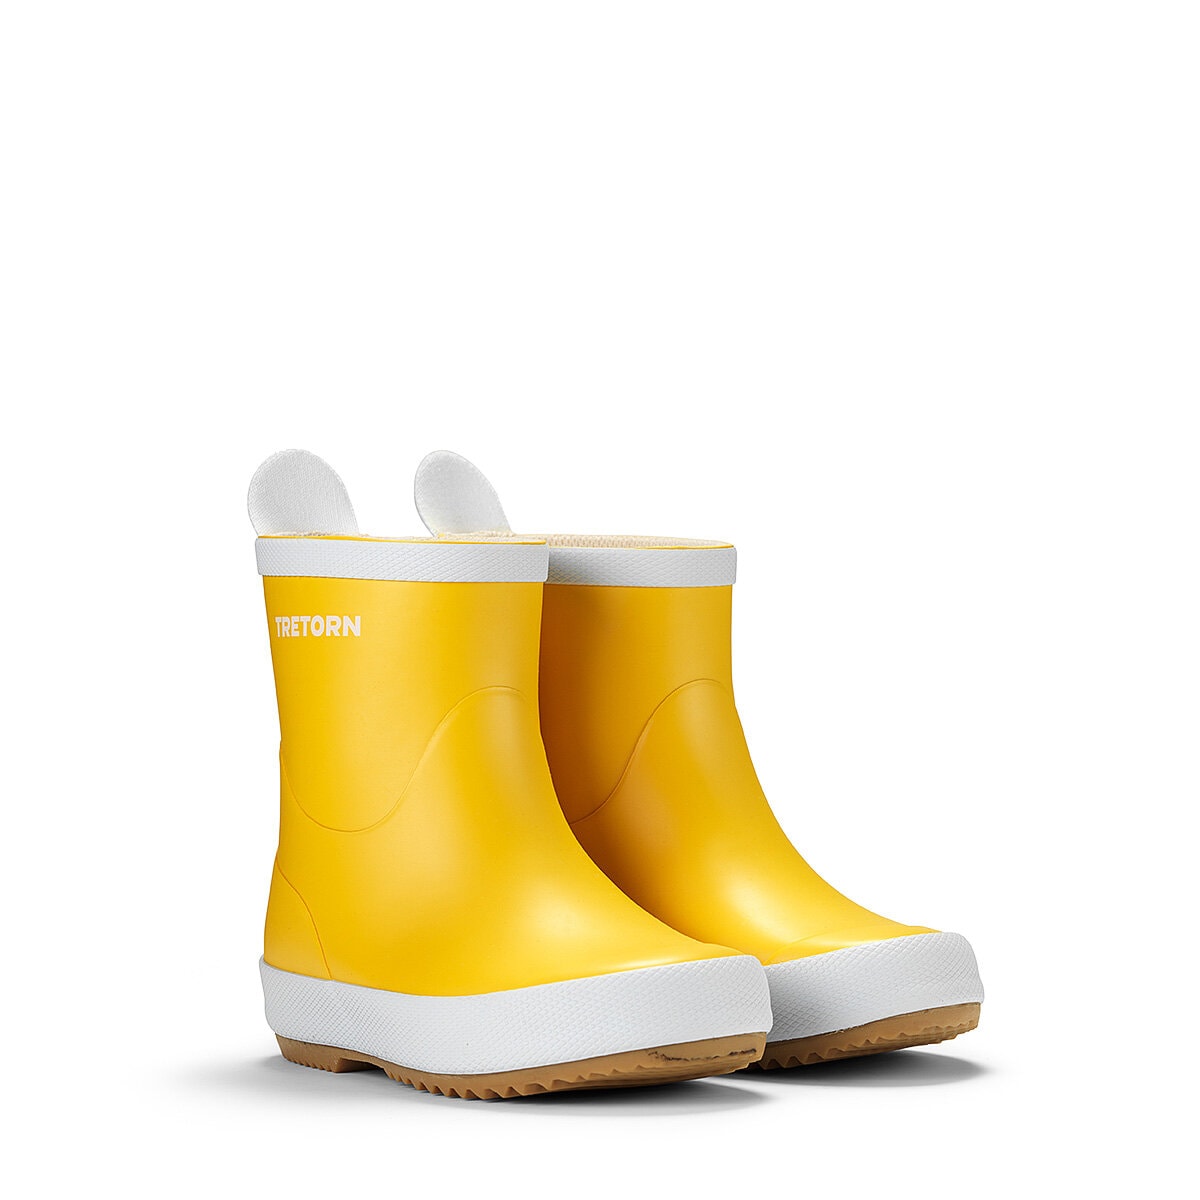 Wings Kids rubber boots by Tretorn for children in the colour yellow